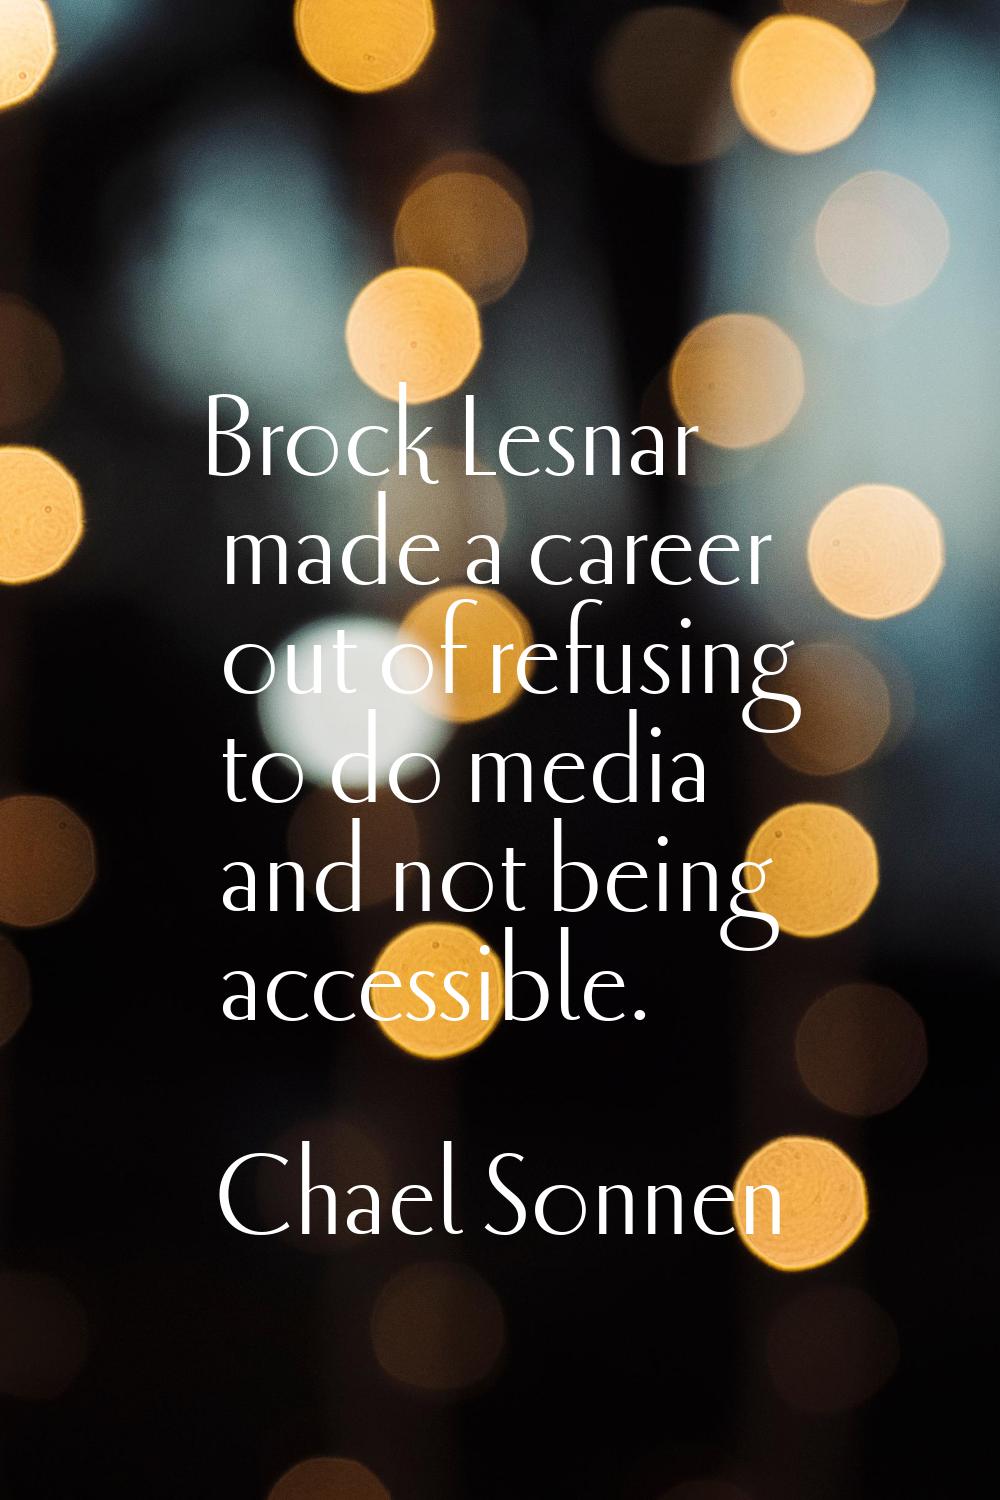 Brock Lesnar made a career out of refusing to do media and not being accessible.